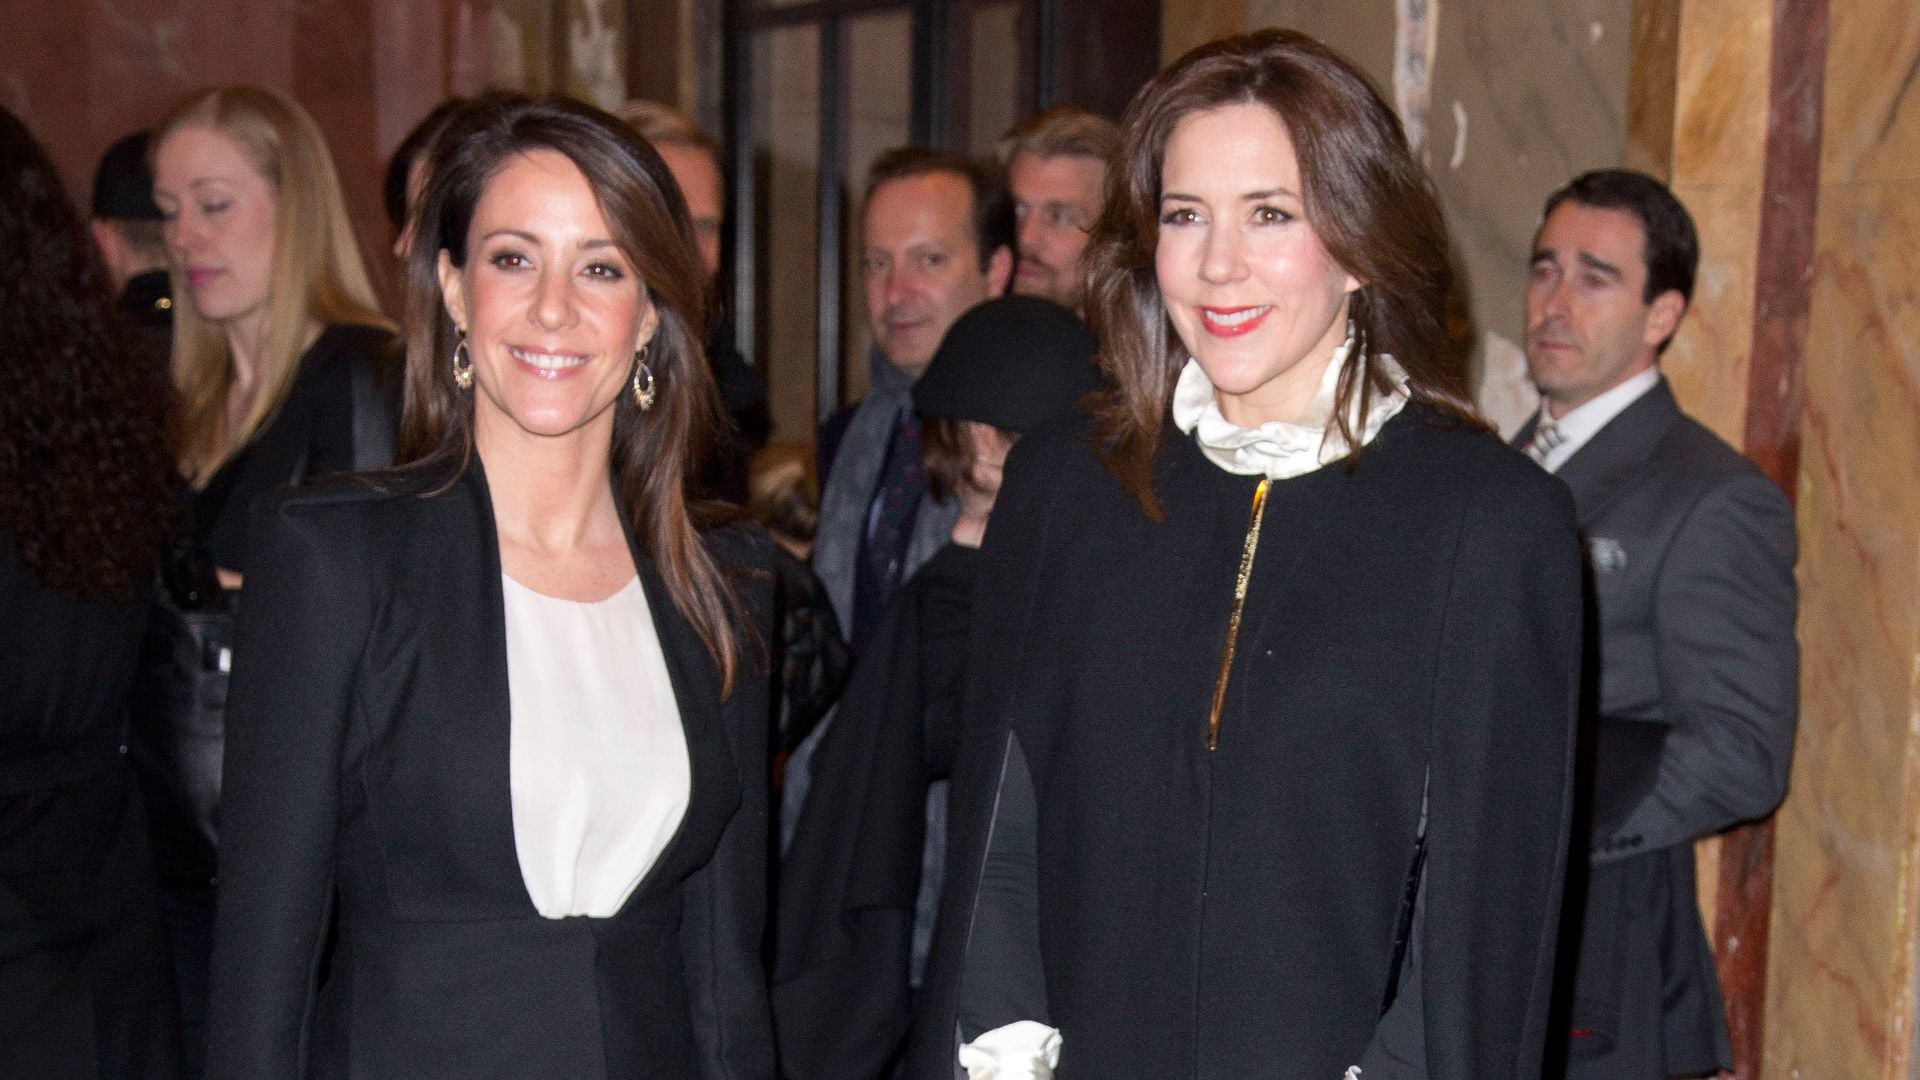 COPENHAGEN, DENMARK - JANUARY 31:  Princess Marie of Denmark (L) and Princess Mary of Denmark attend the Malene Birger show at the Royal Theatre during day two of Copenhagen Fashion Week Autumn/Winter 2013 on January 31, 2013 in Copenhagen, Denmark.  (Pho